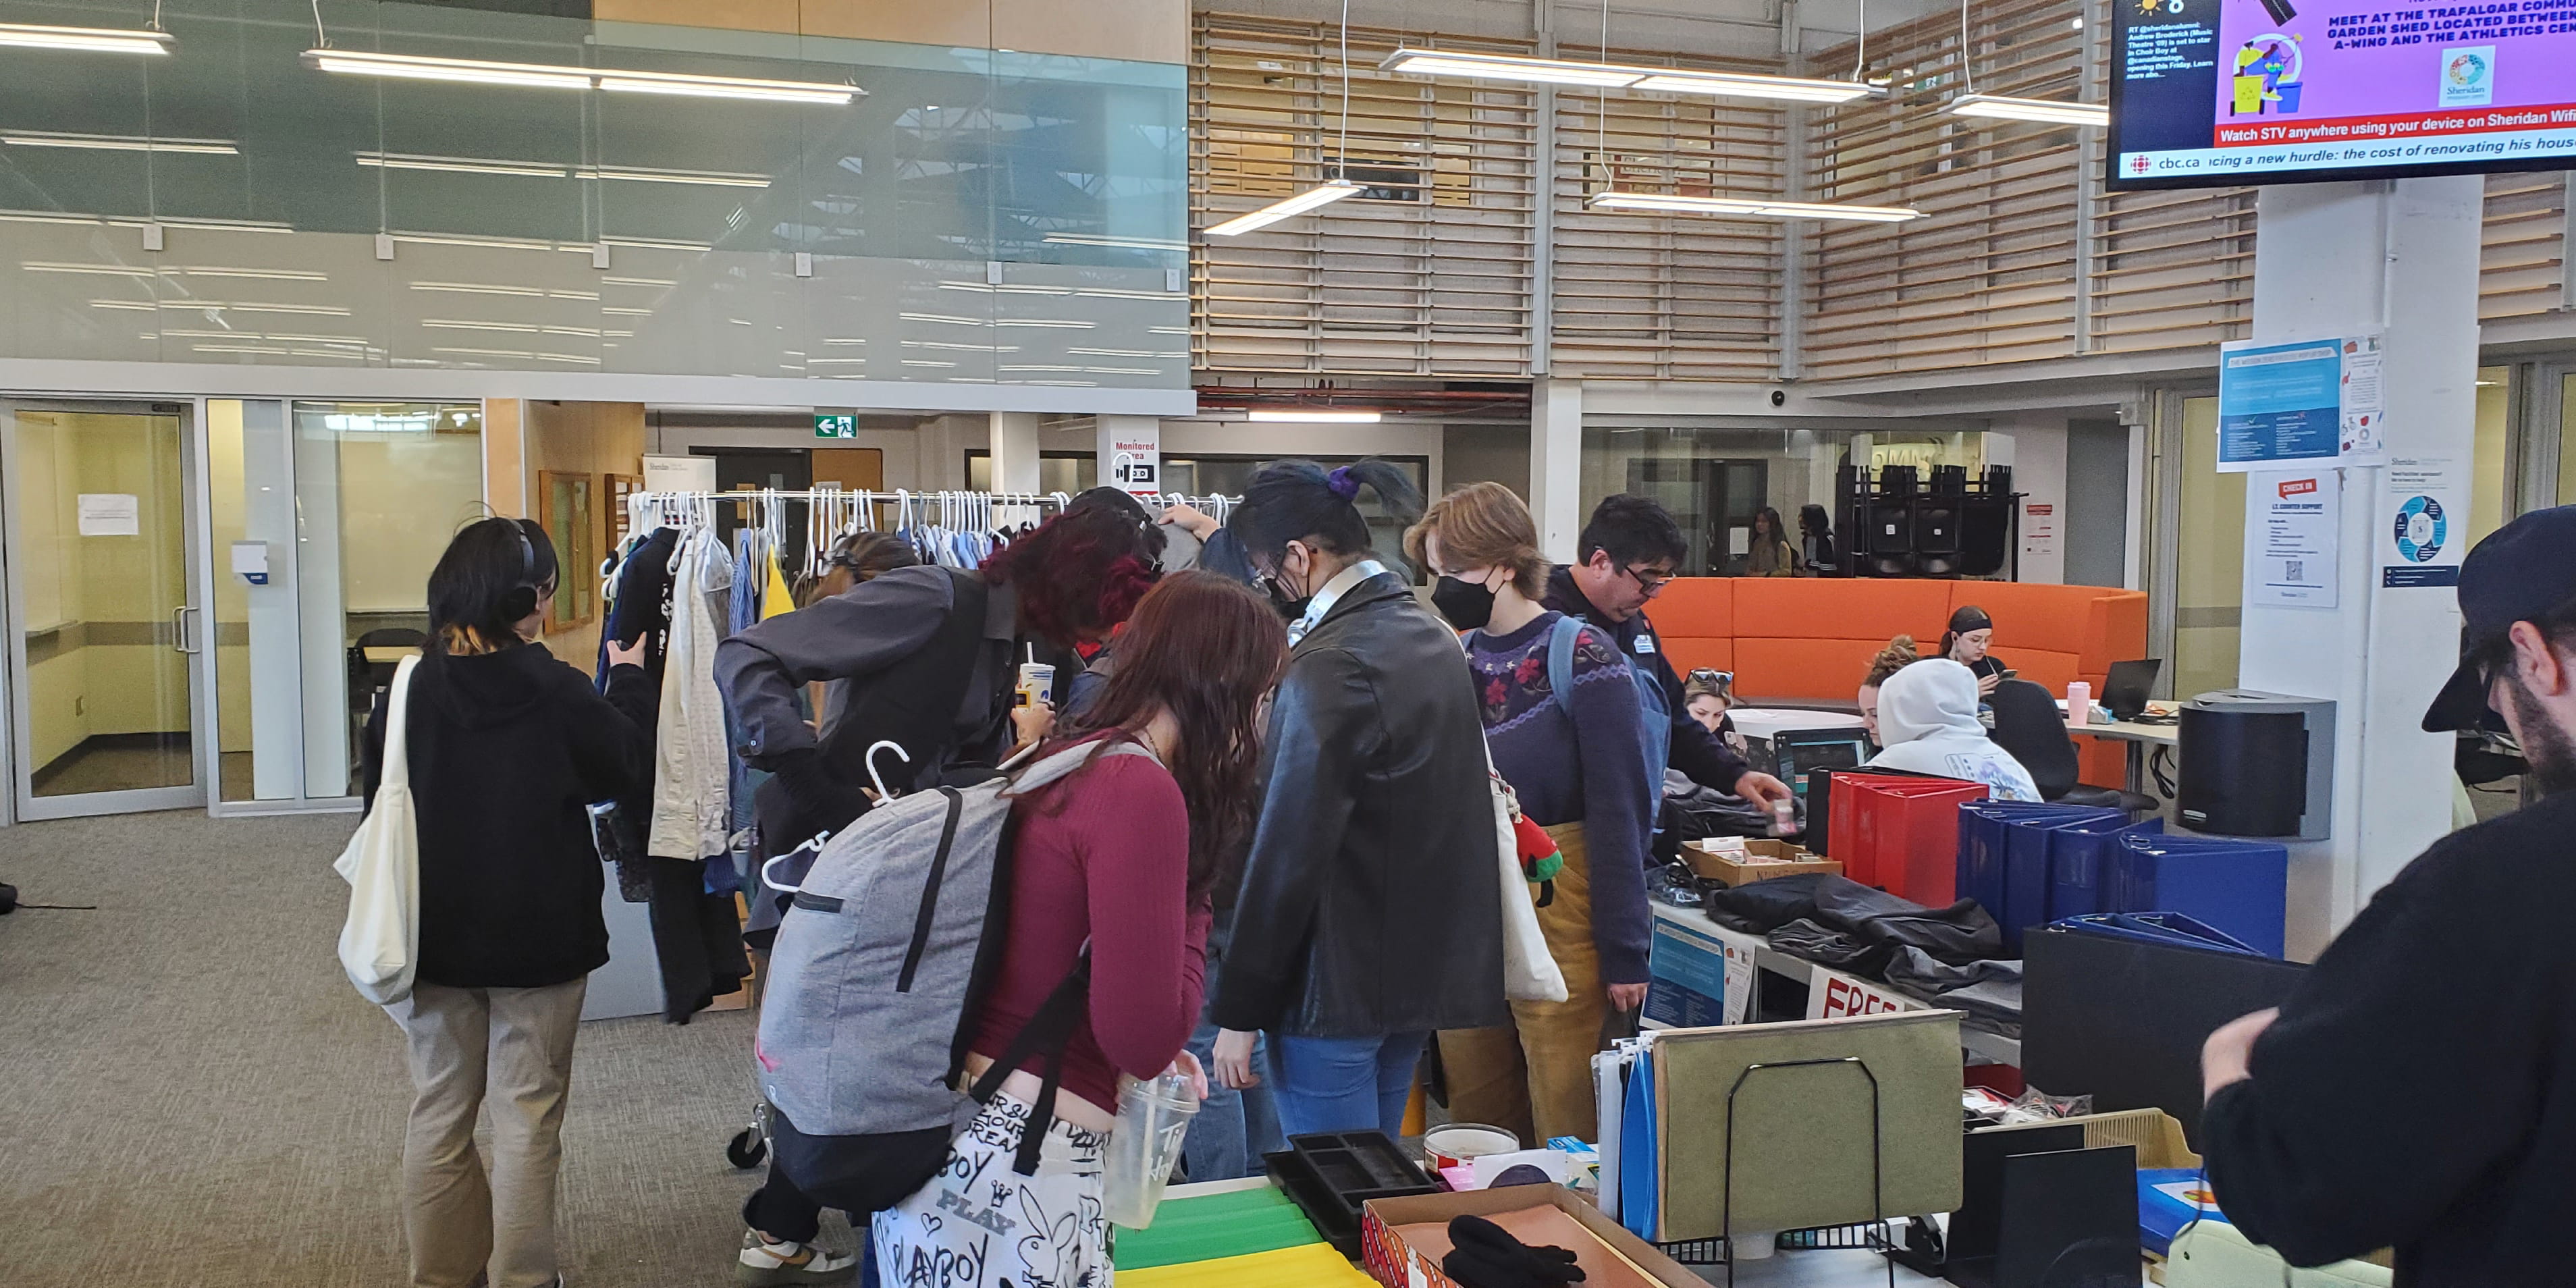 Students at the Freeuse pop-up shop event Trafalgar Campus.